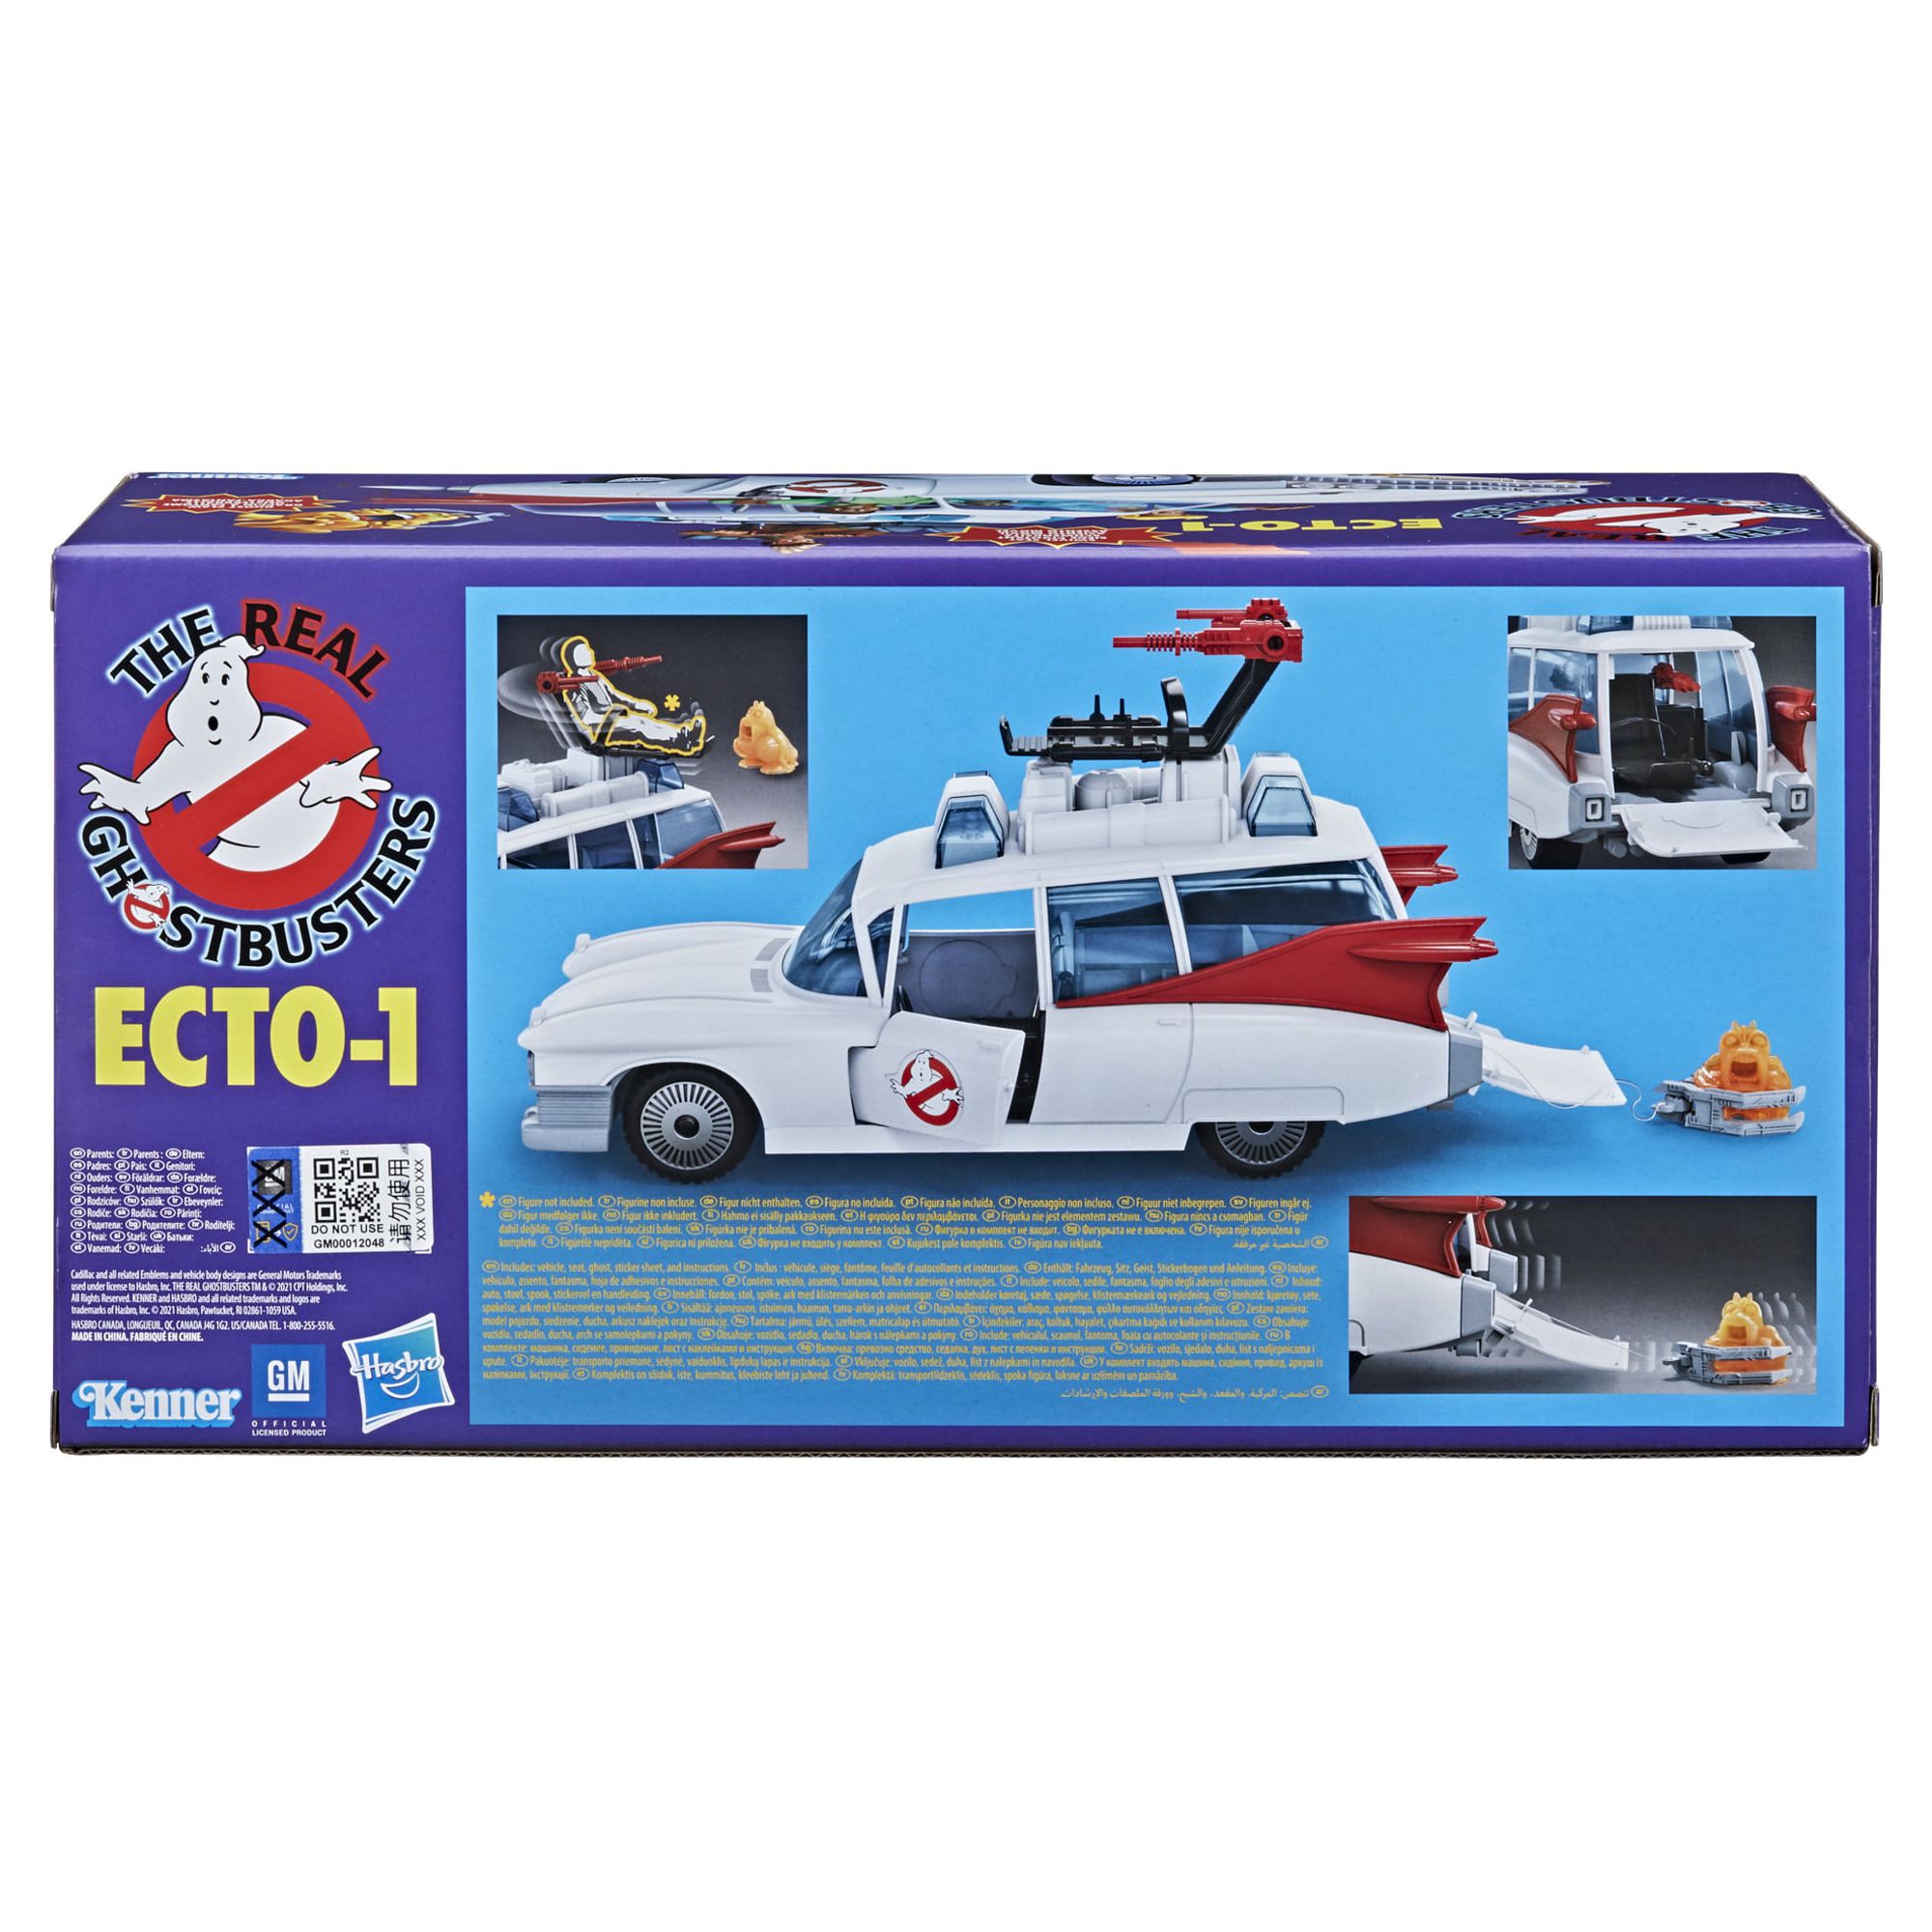 Ghostbusters Kenner Classics the Real Ghostbusters Ecto-1 Retro Vehicle - image 3 of 6